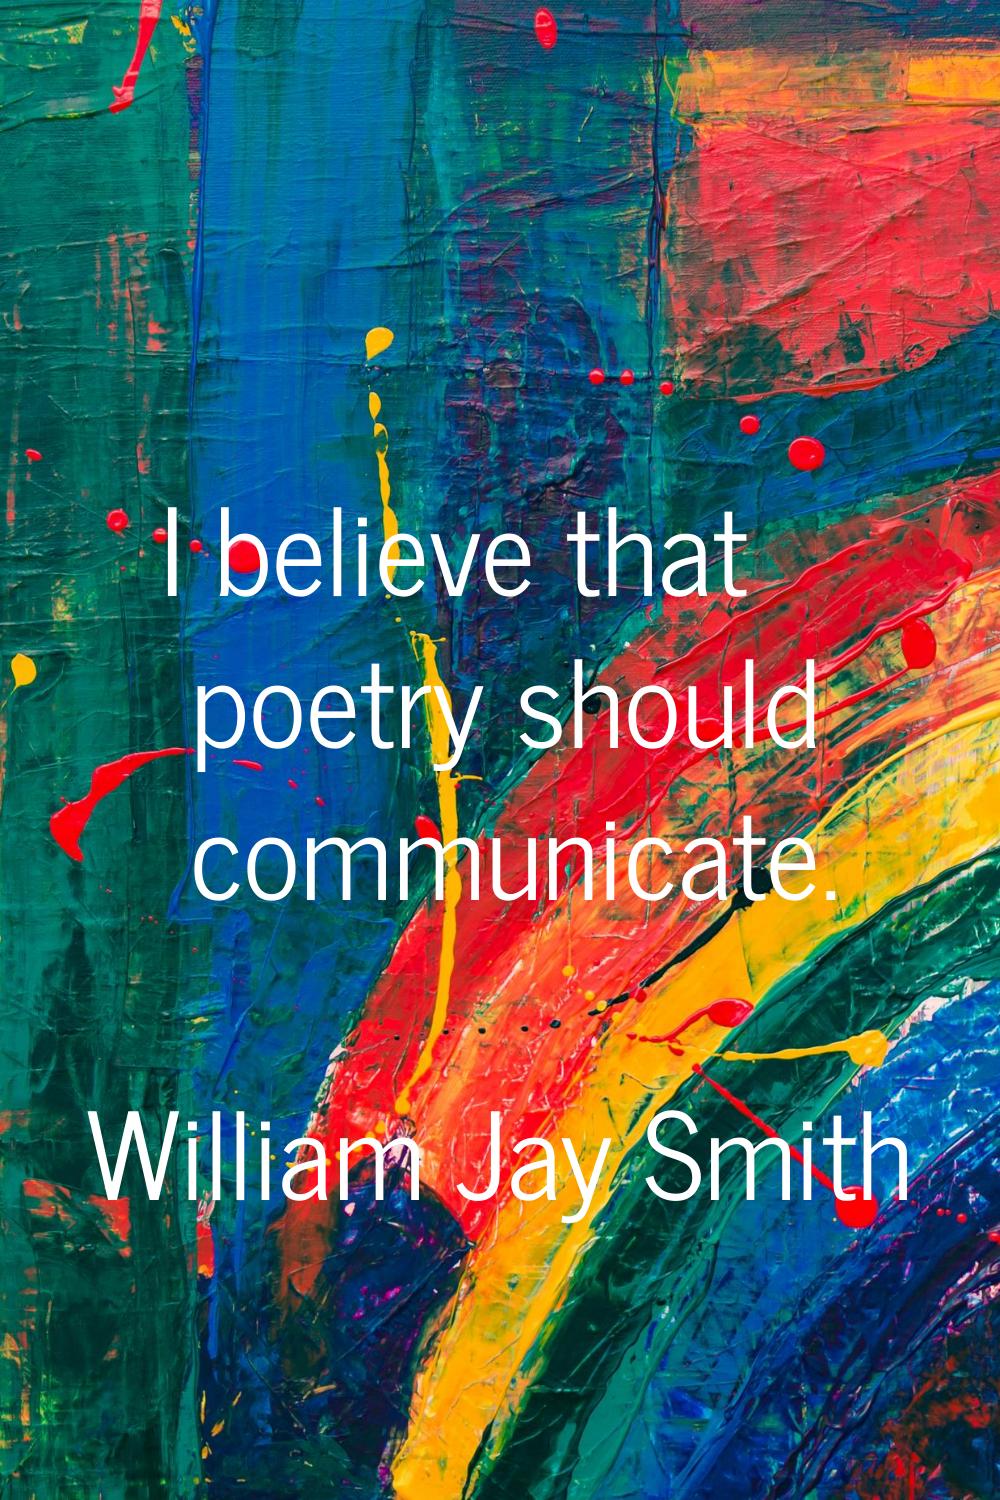 I believe that poetry should communicate.